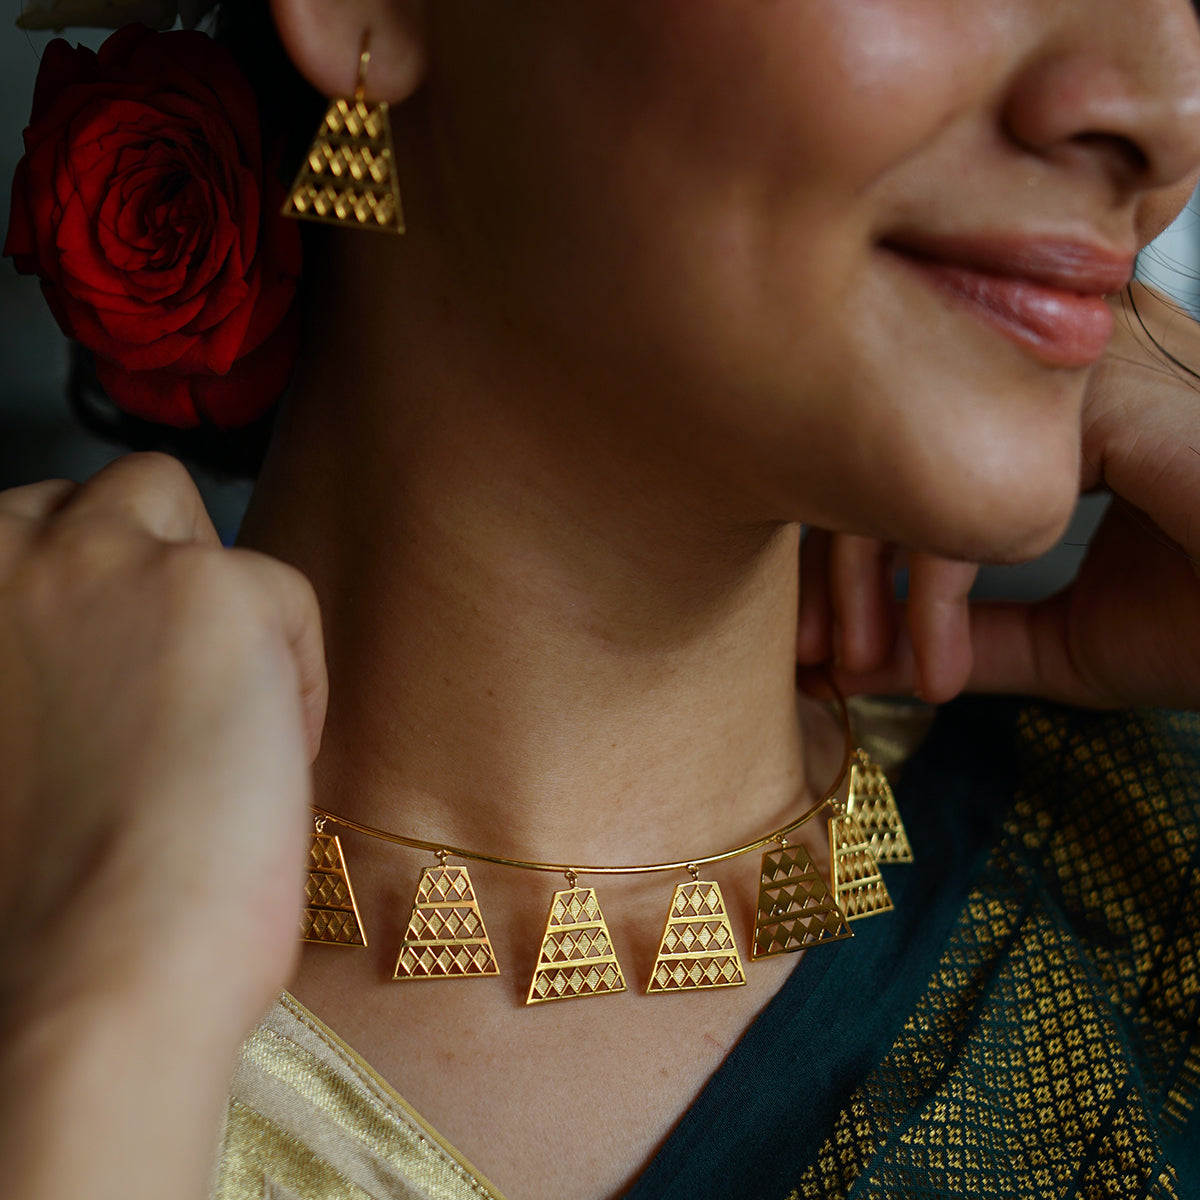 a woman wearing a gold necklace and matching earrings